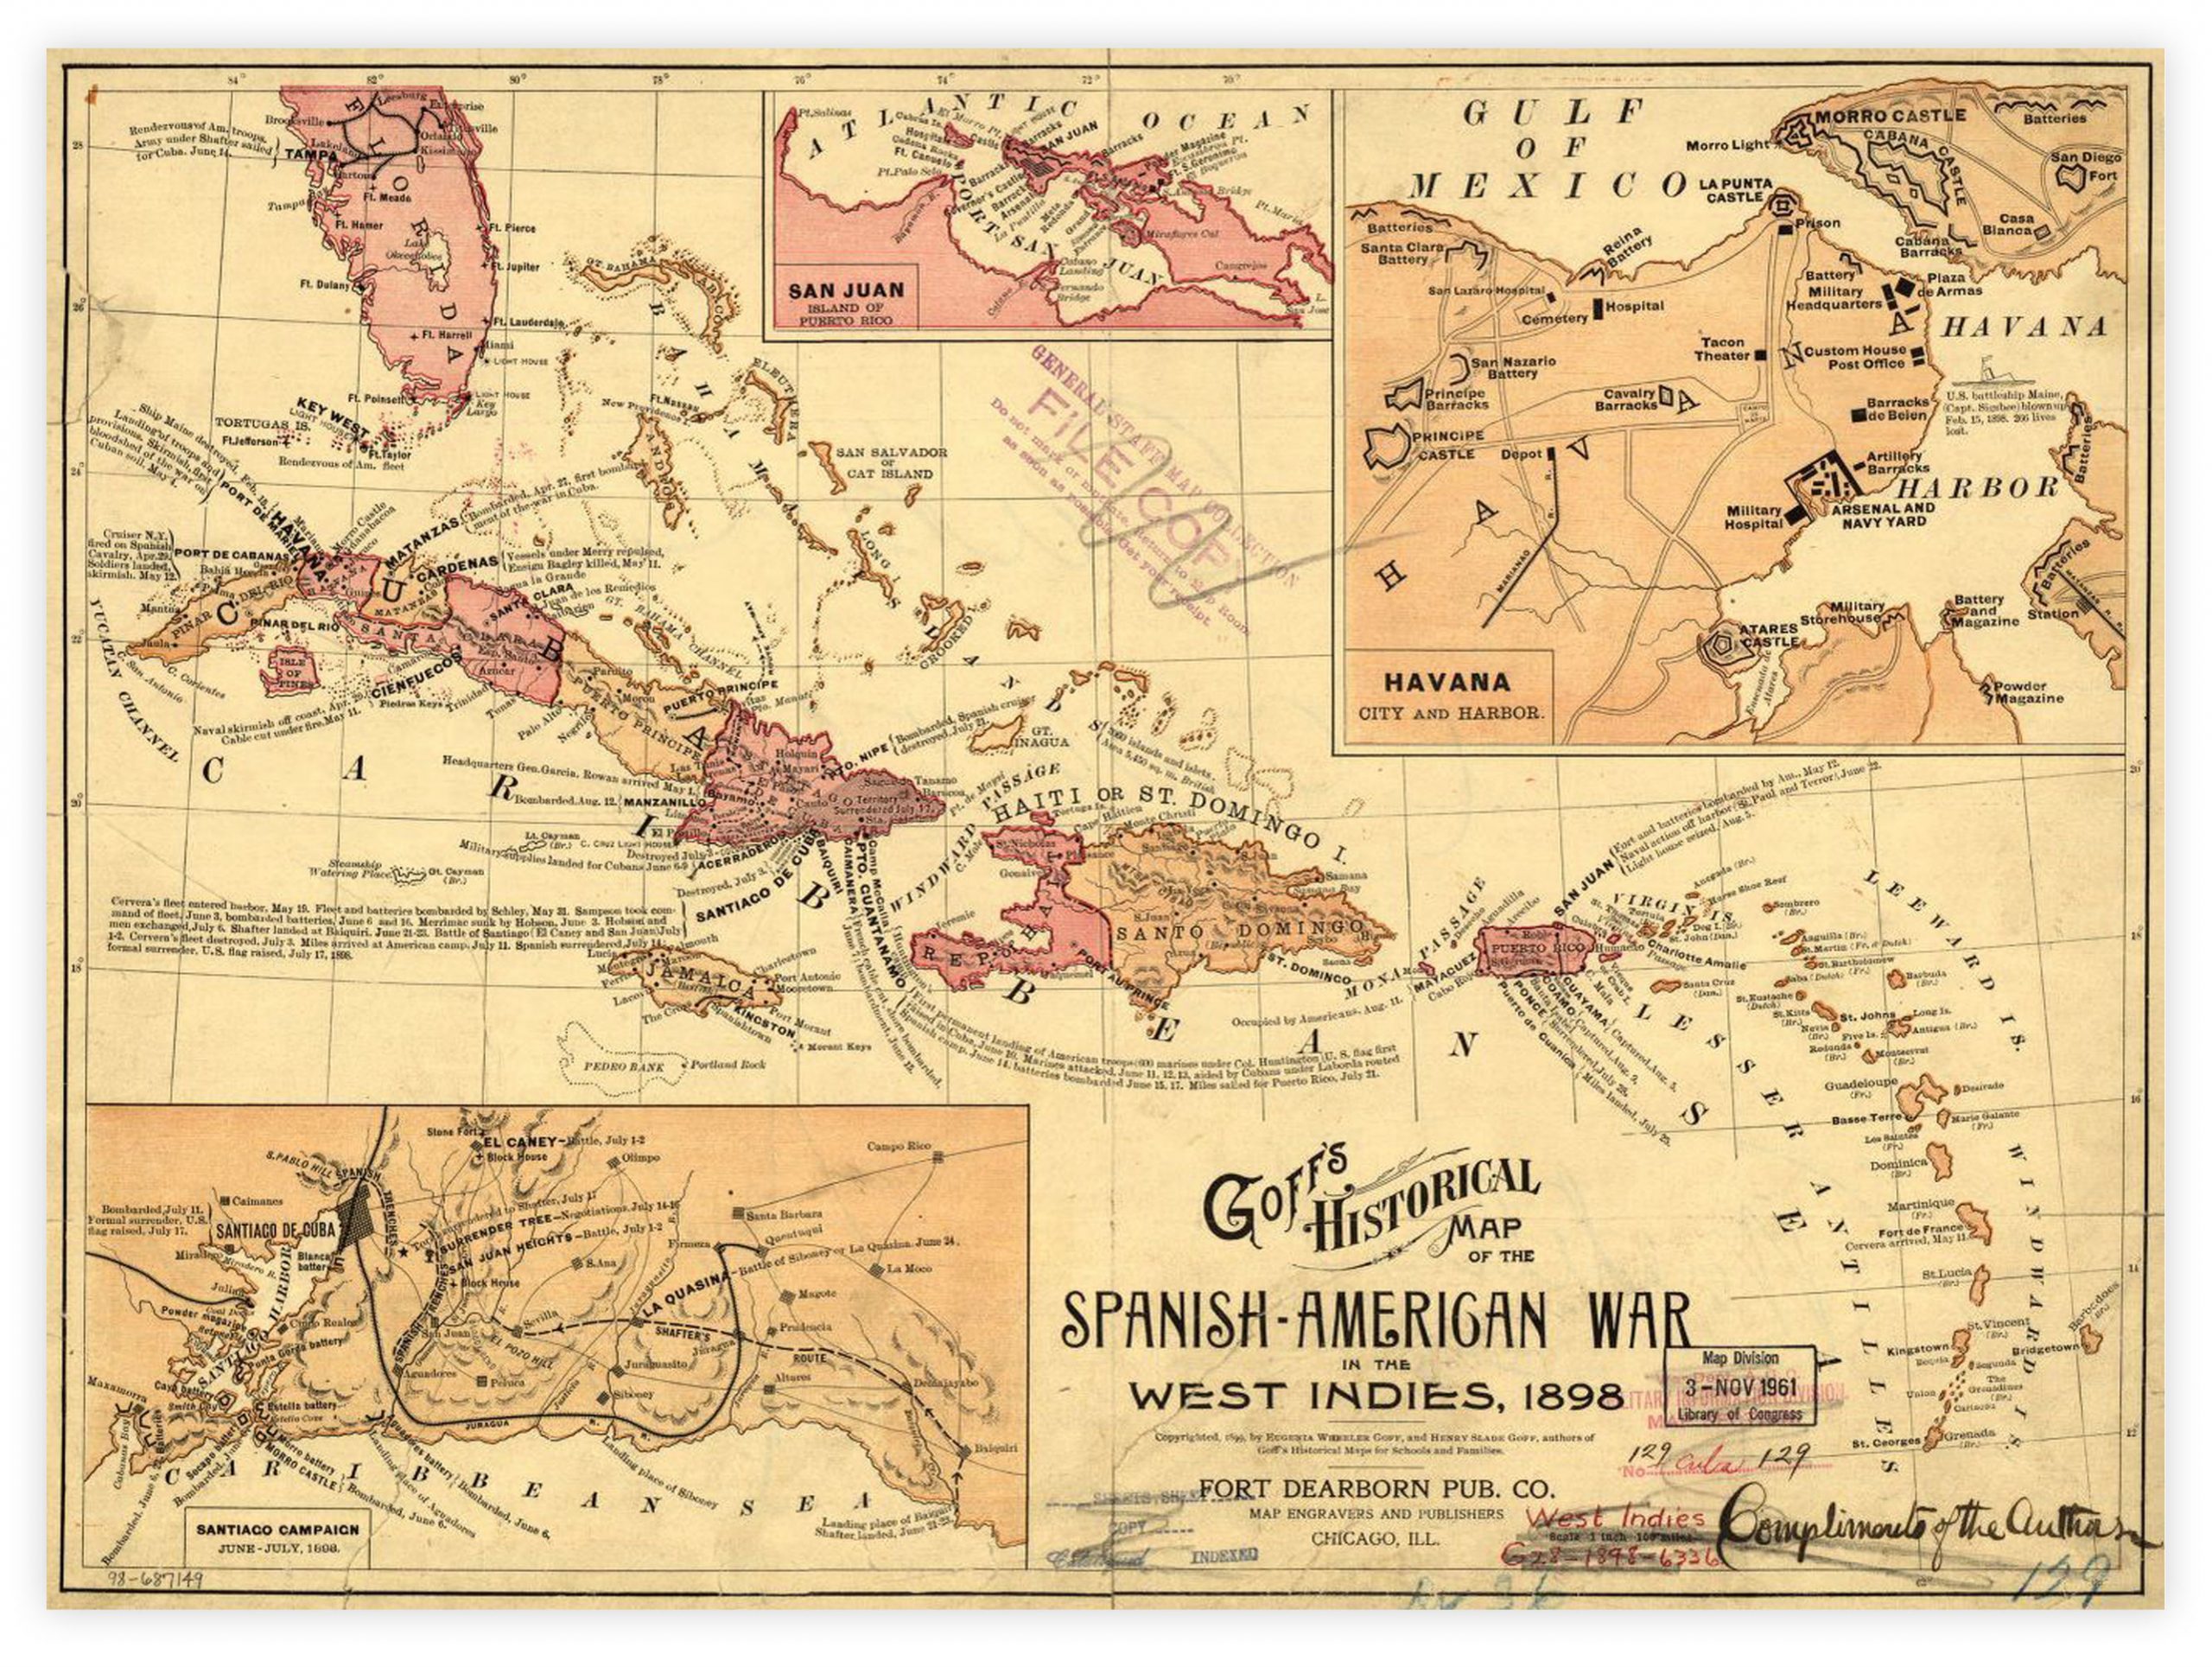 Map of Cuba highlighting significant locations in the Spanish-American War.